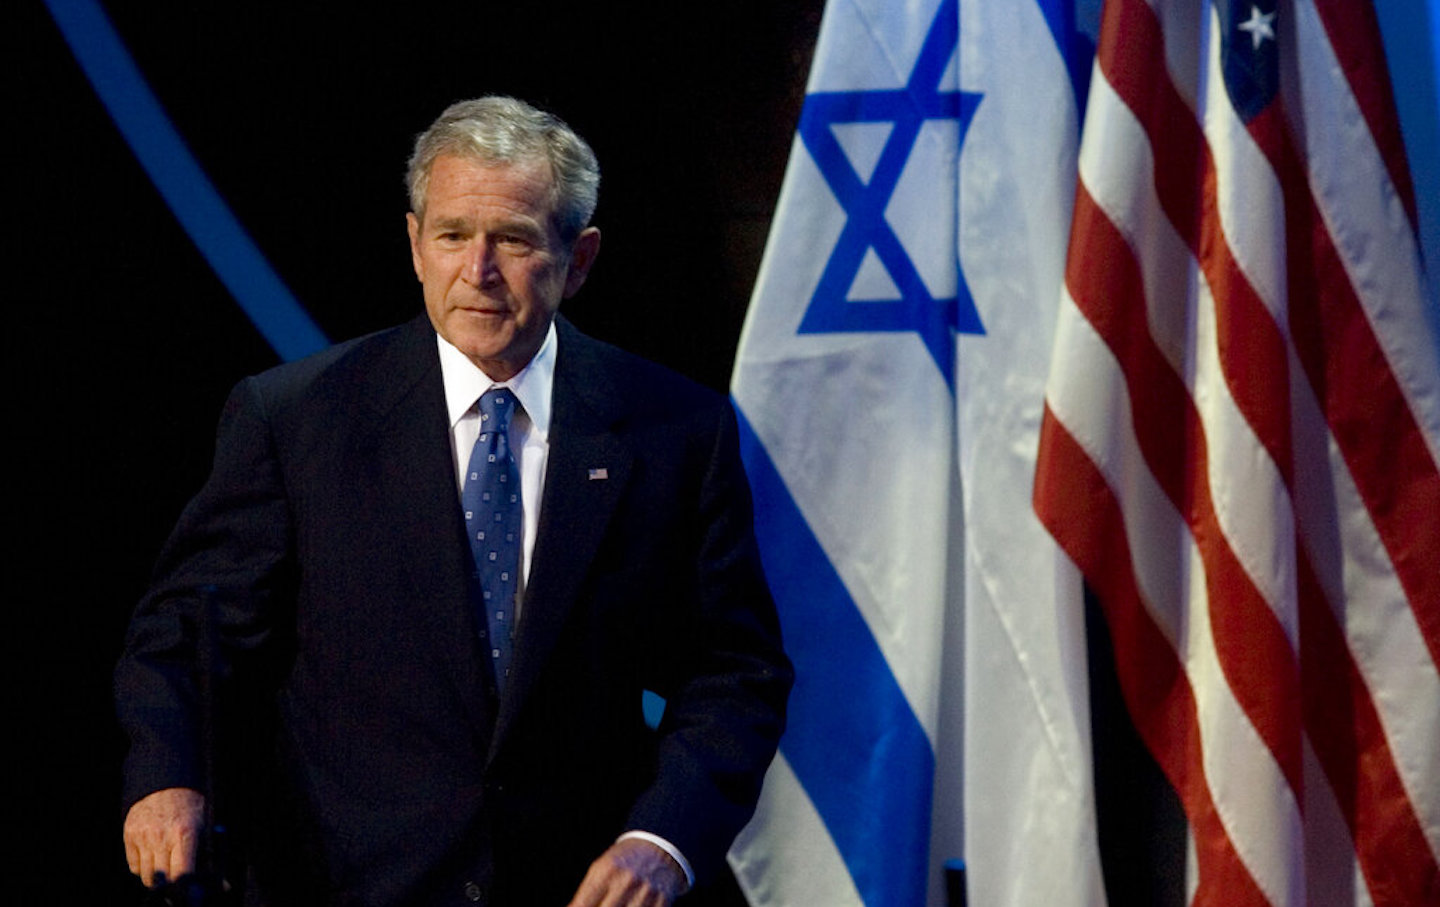 George W. Bush at the Israeli Presidential Conference in 2008, at the Jerusalem International Convention Center.